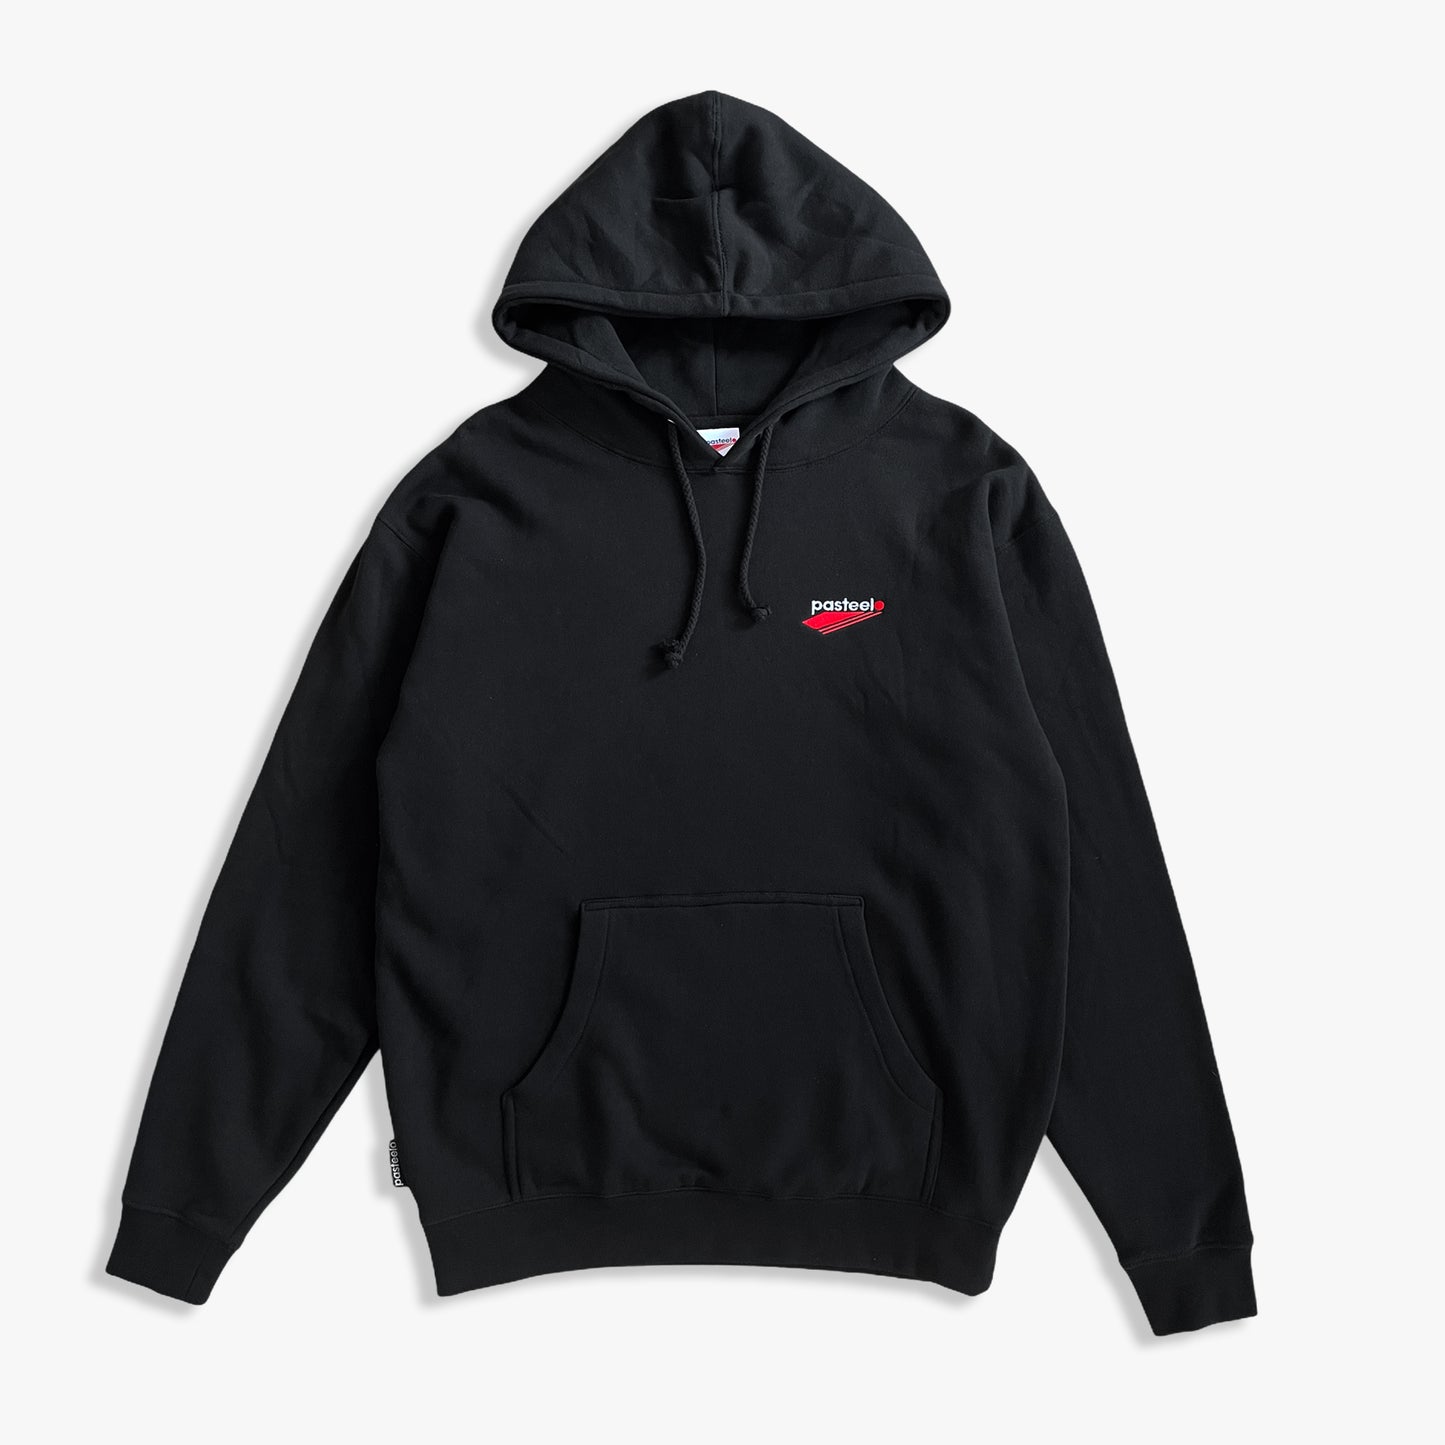 EMBROIDERED O.G. HOODIE - BLACK